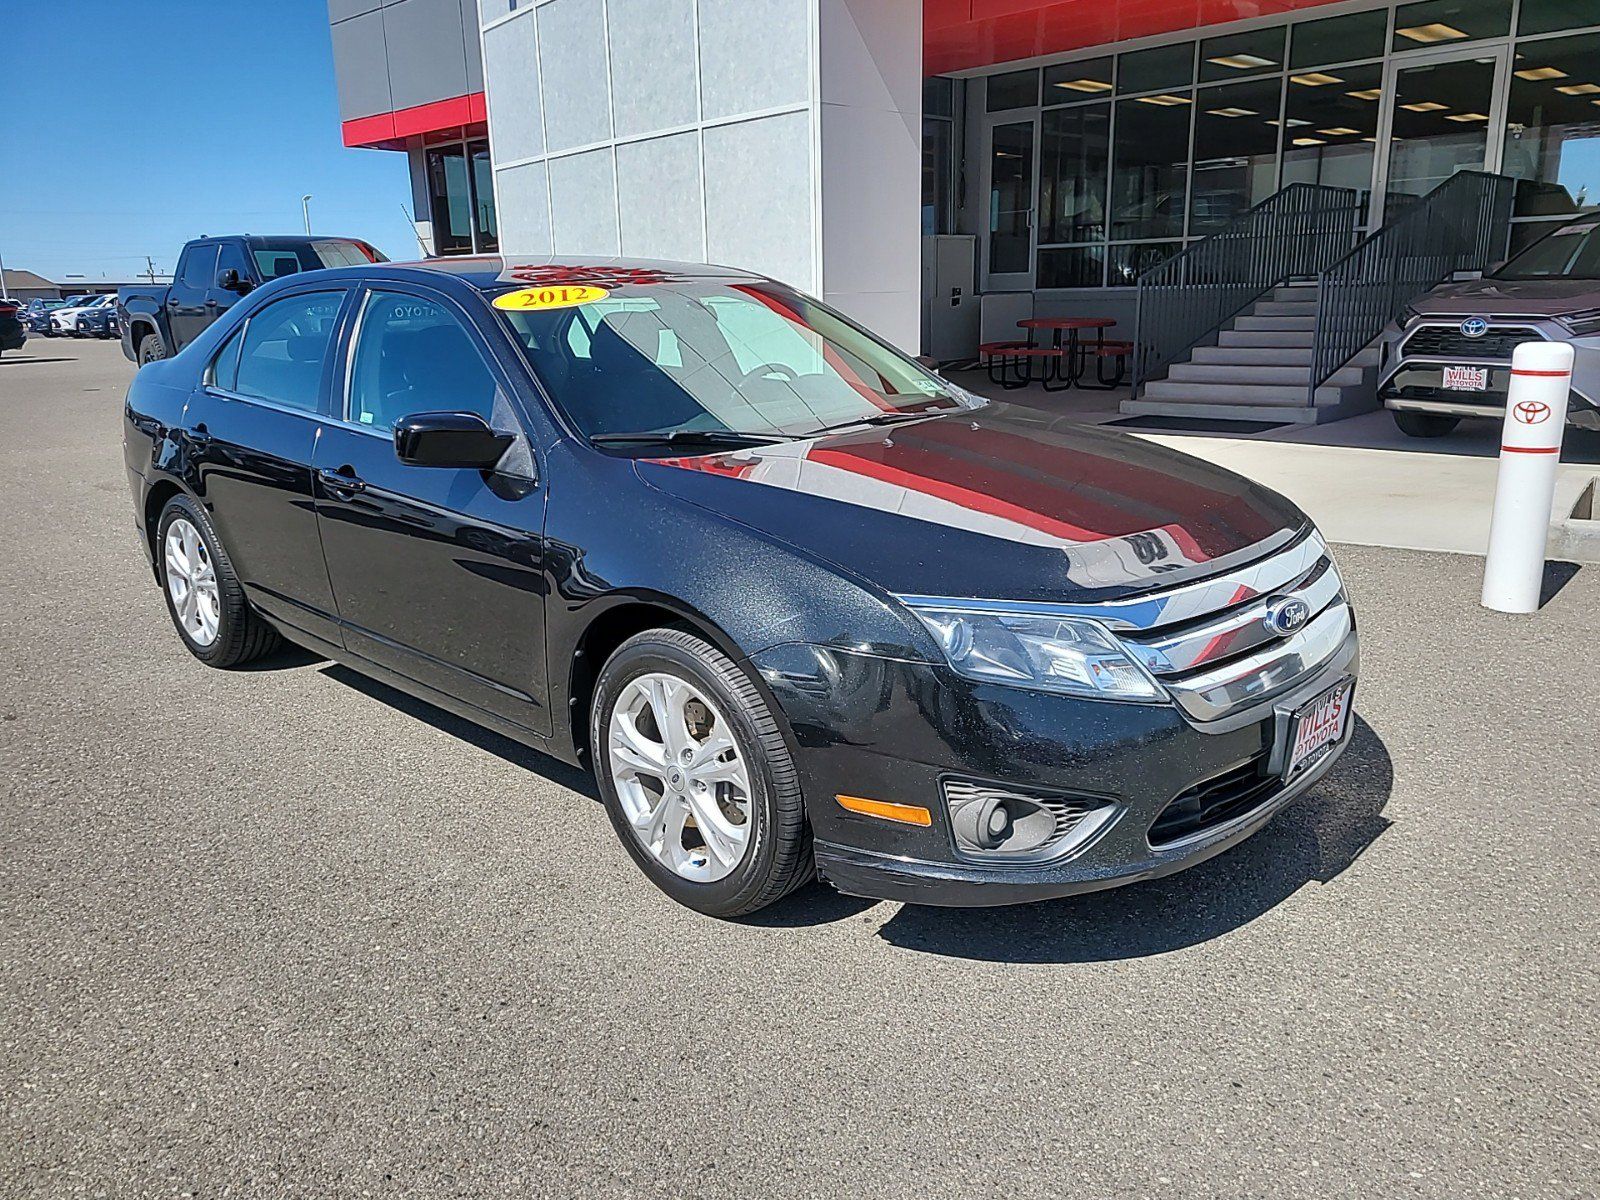 2012 - Ford - Fusion - $7,997